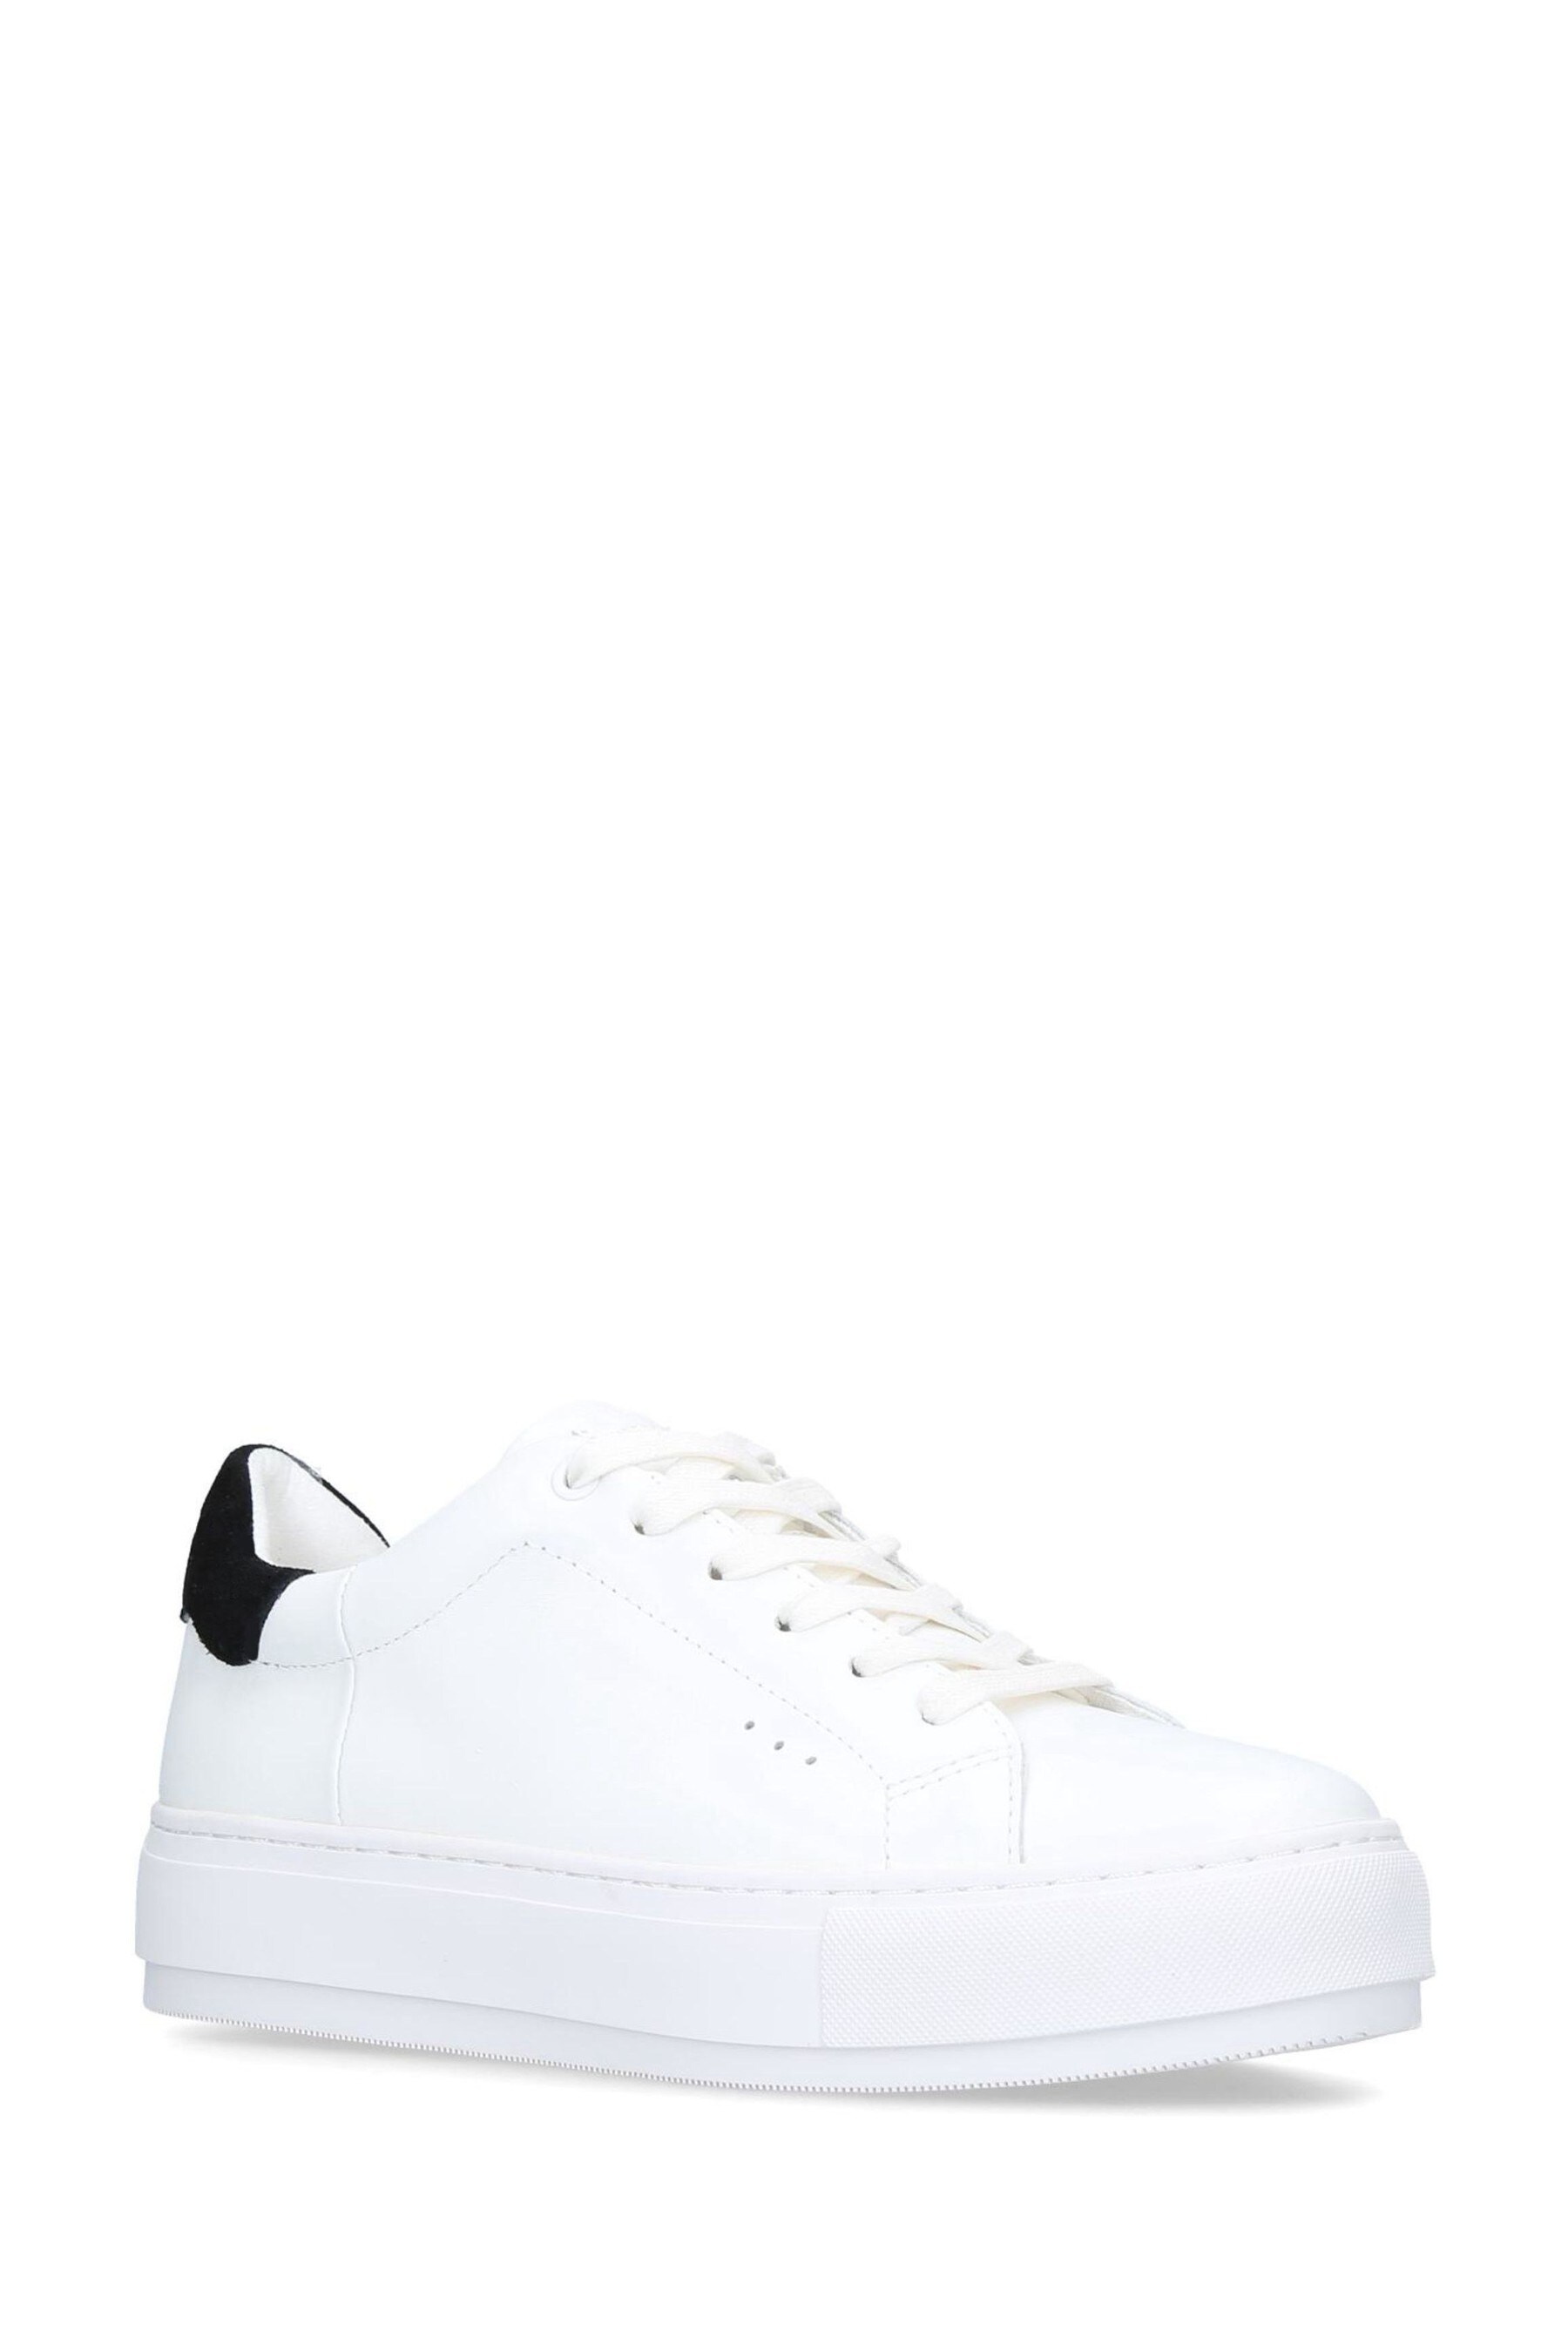 Buy Kurt Geiger White Laney Trainers from the Next UK online shop